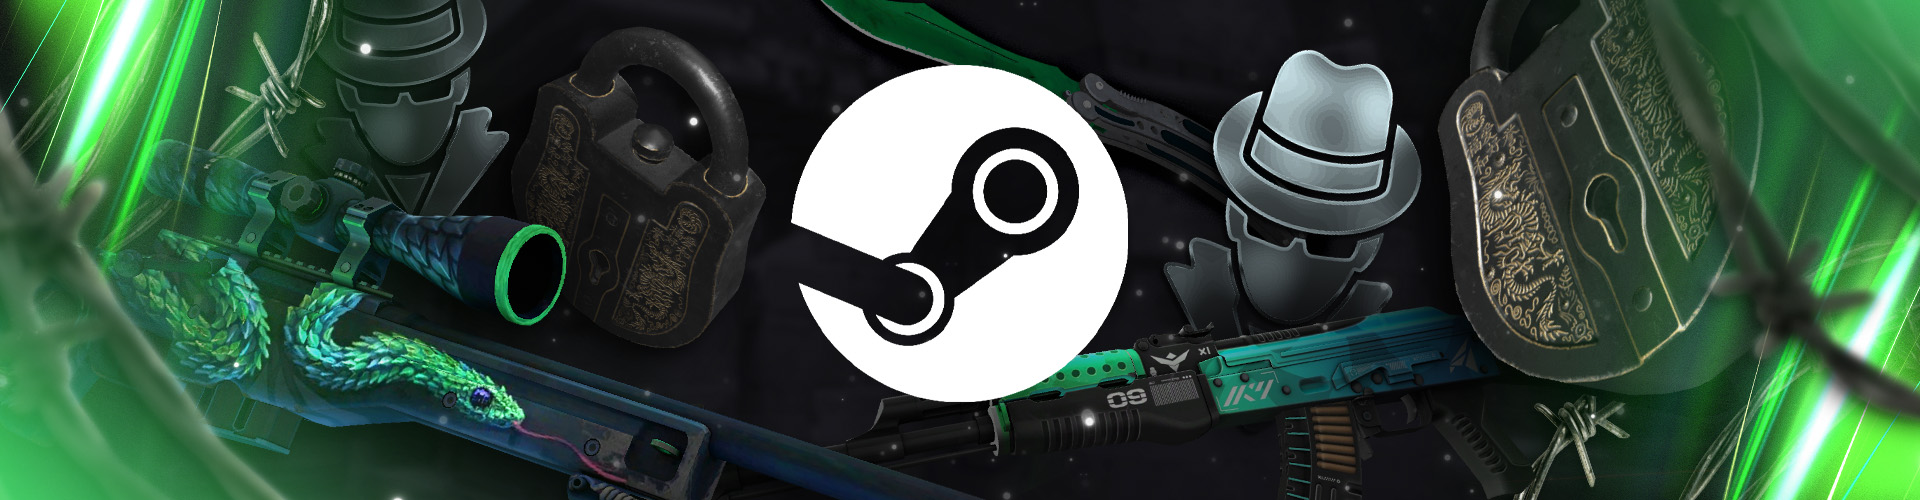 Navigating CS2 Skin Trading Safely: Common Steam Scams & Prevention Strategies